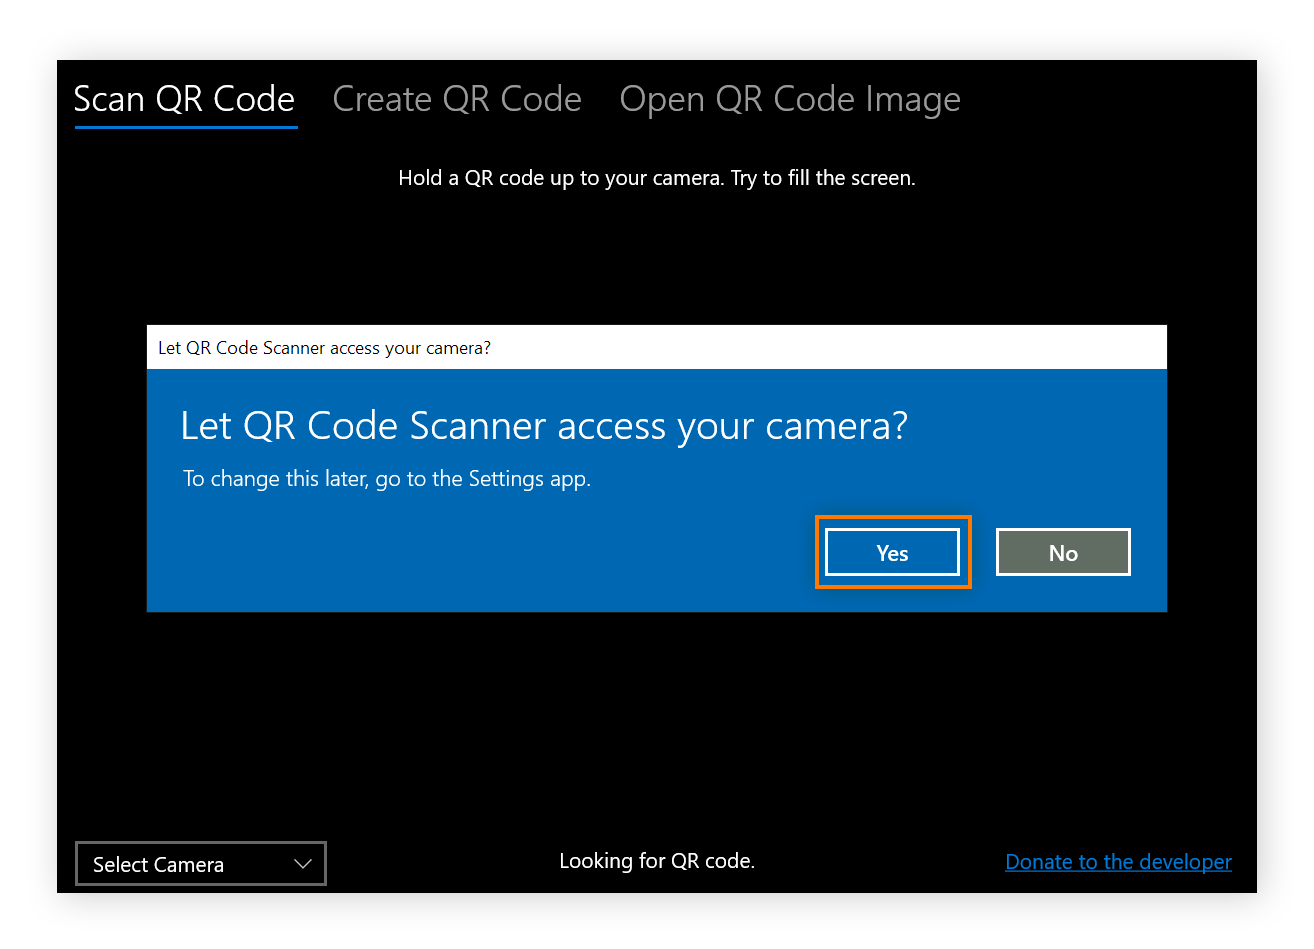 QR code scanner is open on PC. A pop-up says "Let QR code scanner use your camera?" and the button Yes is circled.